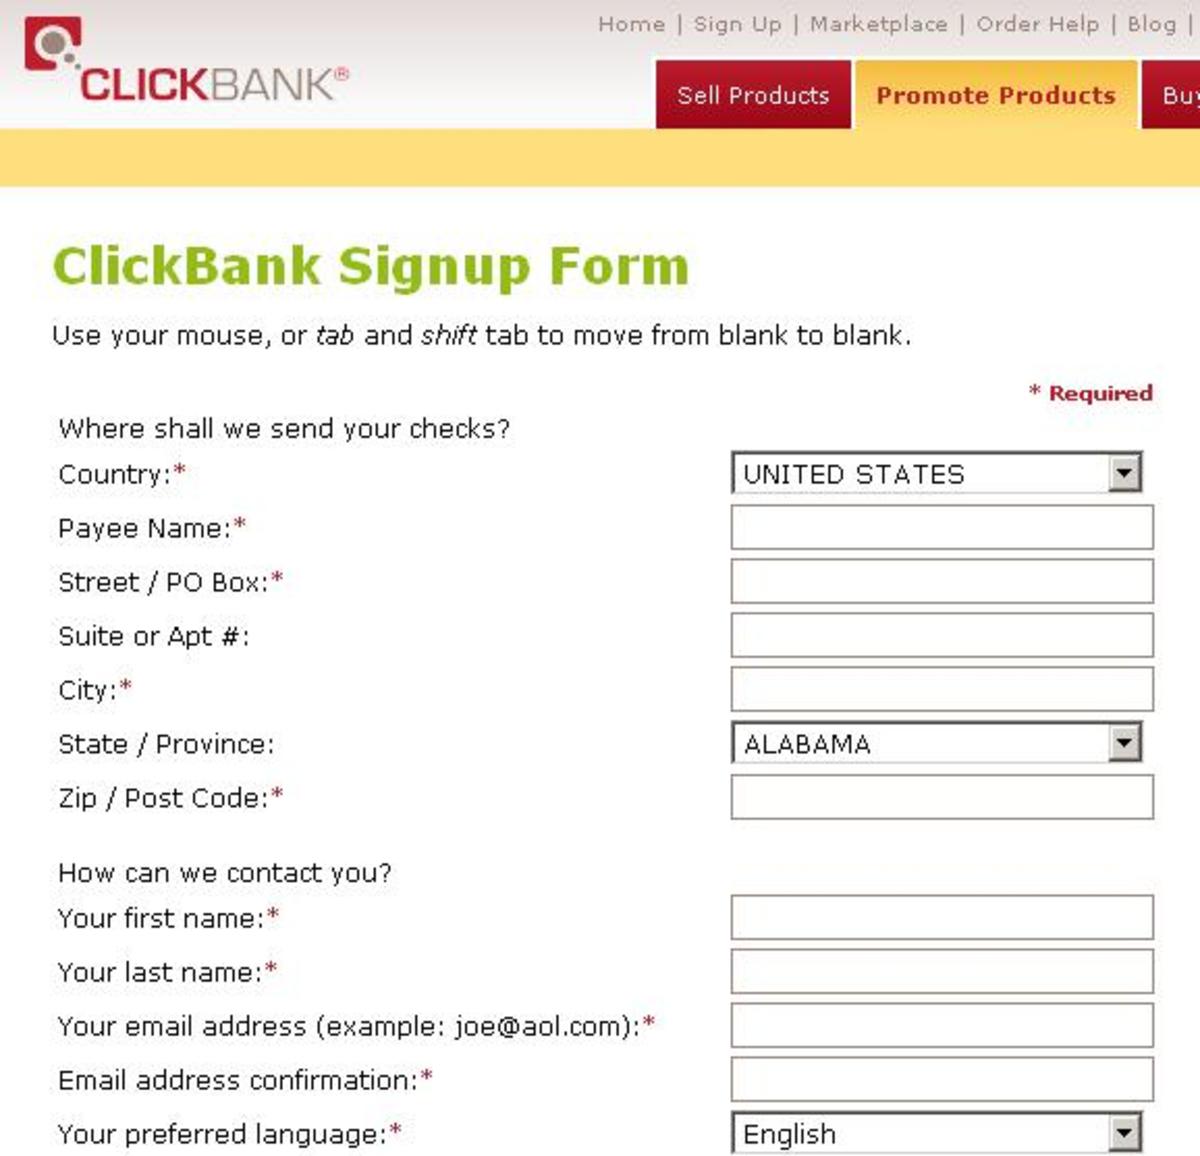 Sign up for a Clickbank account